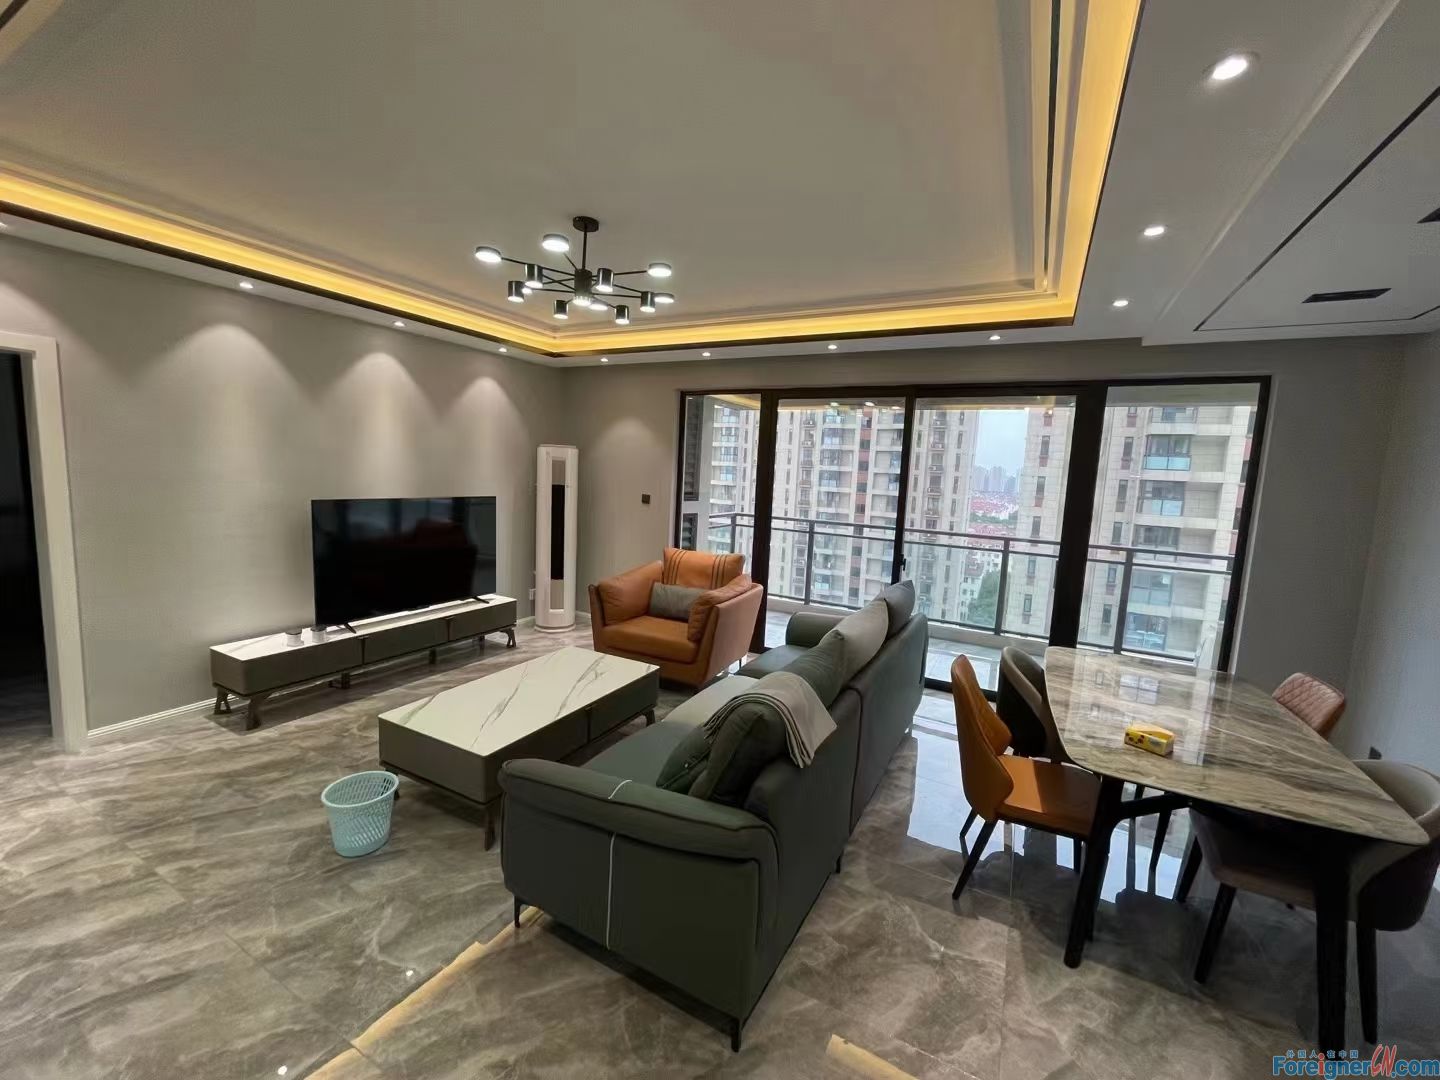 Stunning!! Find a Place in Suzhou / nice Apartment/3 bedrooms,2 baths/with a big Balcony/Nearby XieTang Town,shopping Plaza/ close to internatioanl schools SSIS, Dulwish, and OCAC